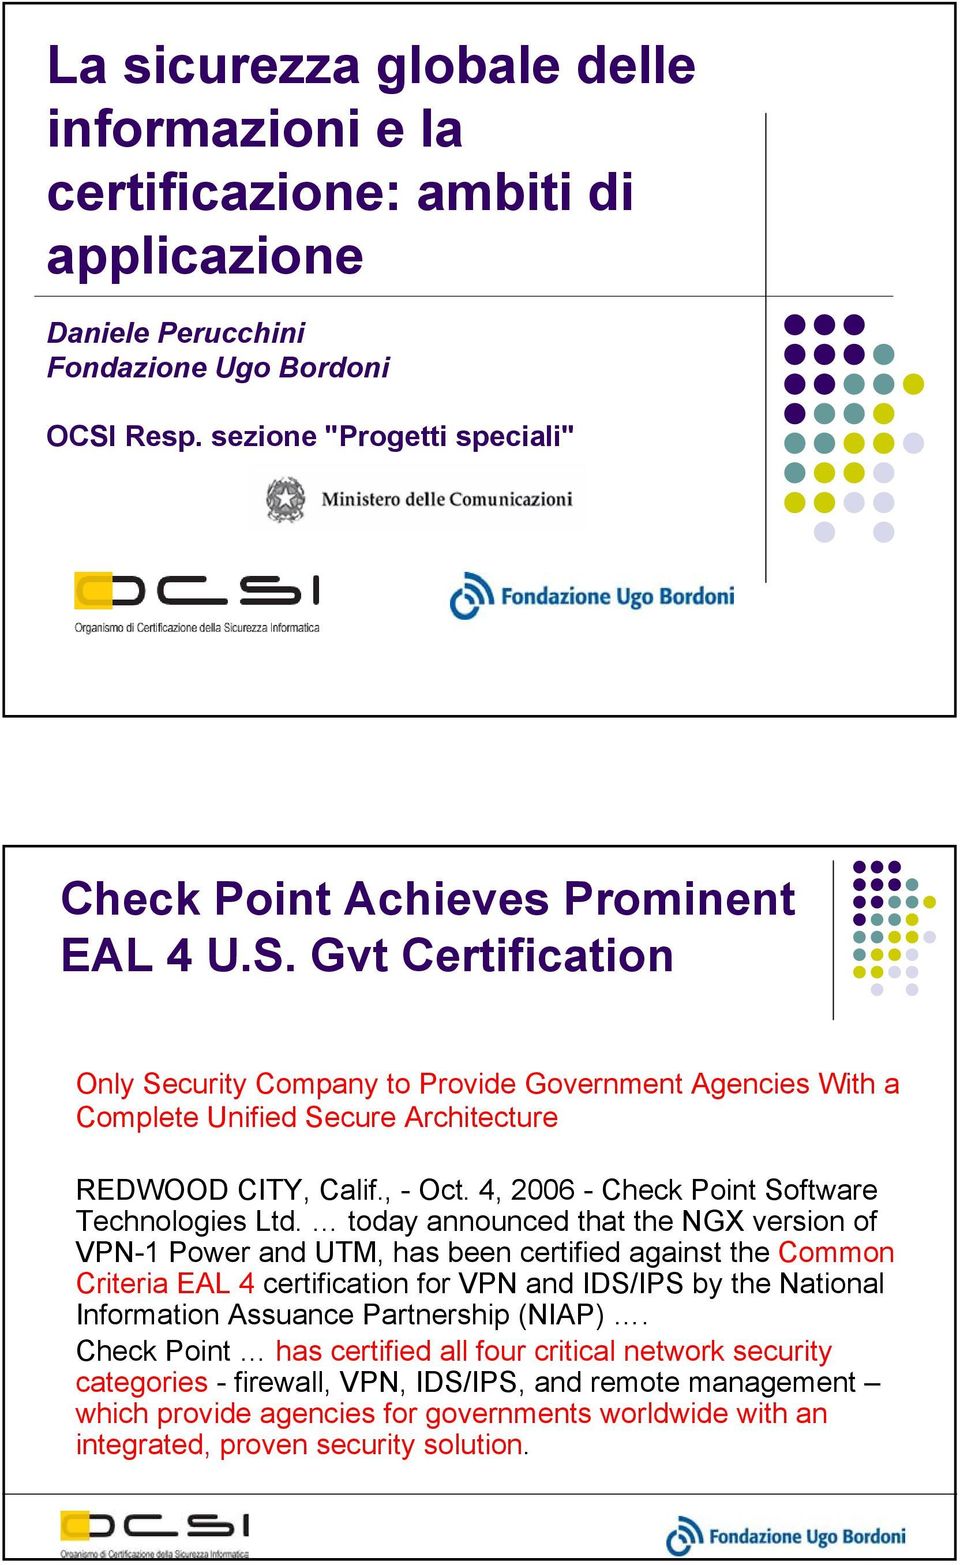 Gvt Certification Only Security Company to Provide Government Agencies With a Complete Unified Secure Architecture REDWOOD CITY, Calif., - Oct. 4, 2006 - Check Point Software Technologies Ltd.